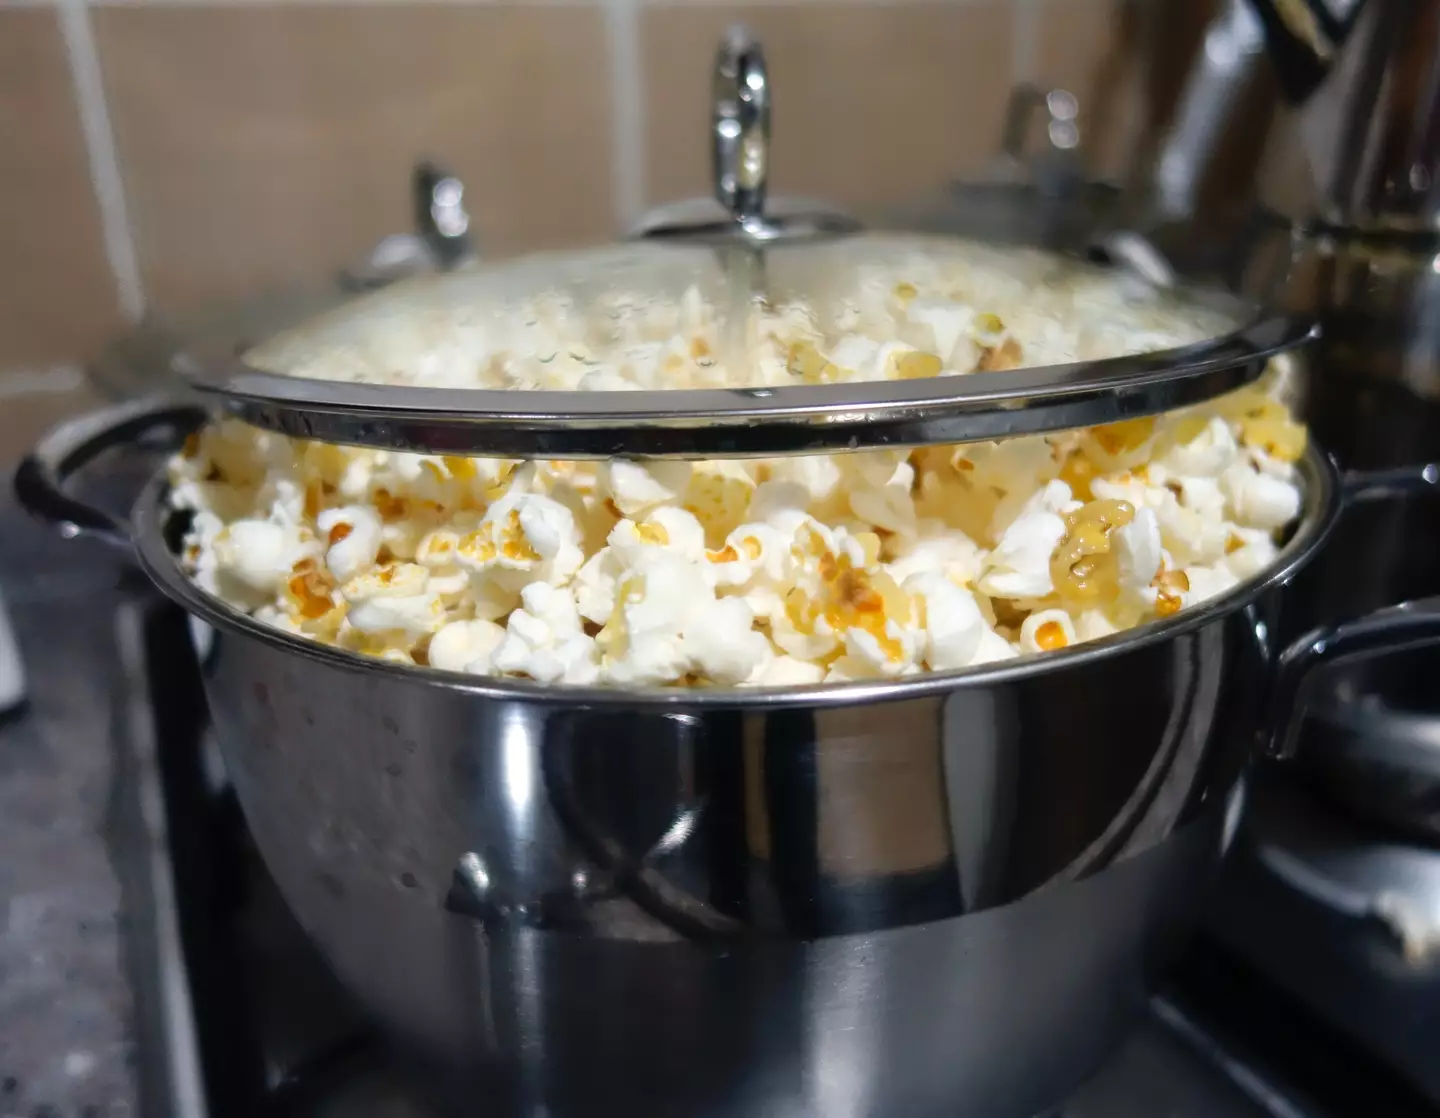 Leave your popcorn to the pan, rather than the air fryer.